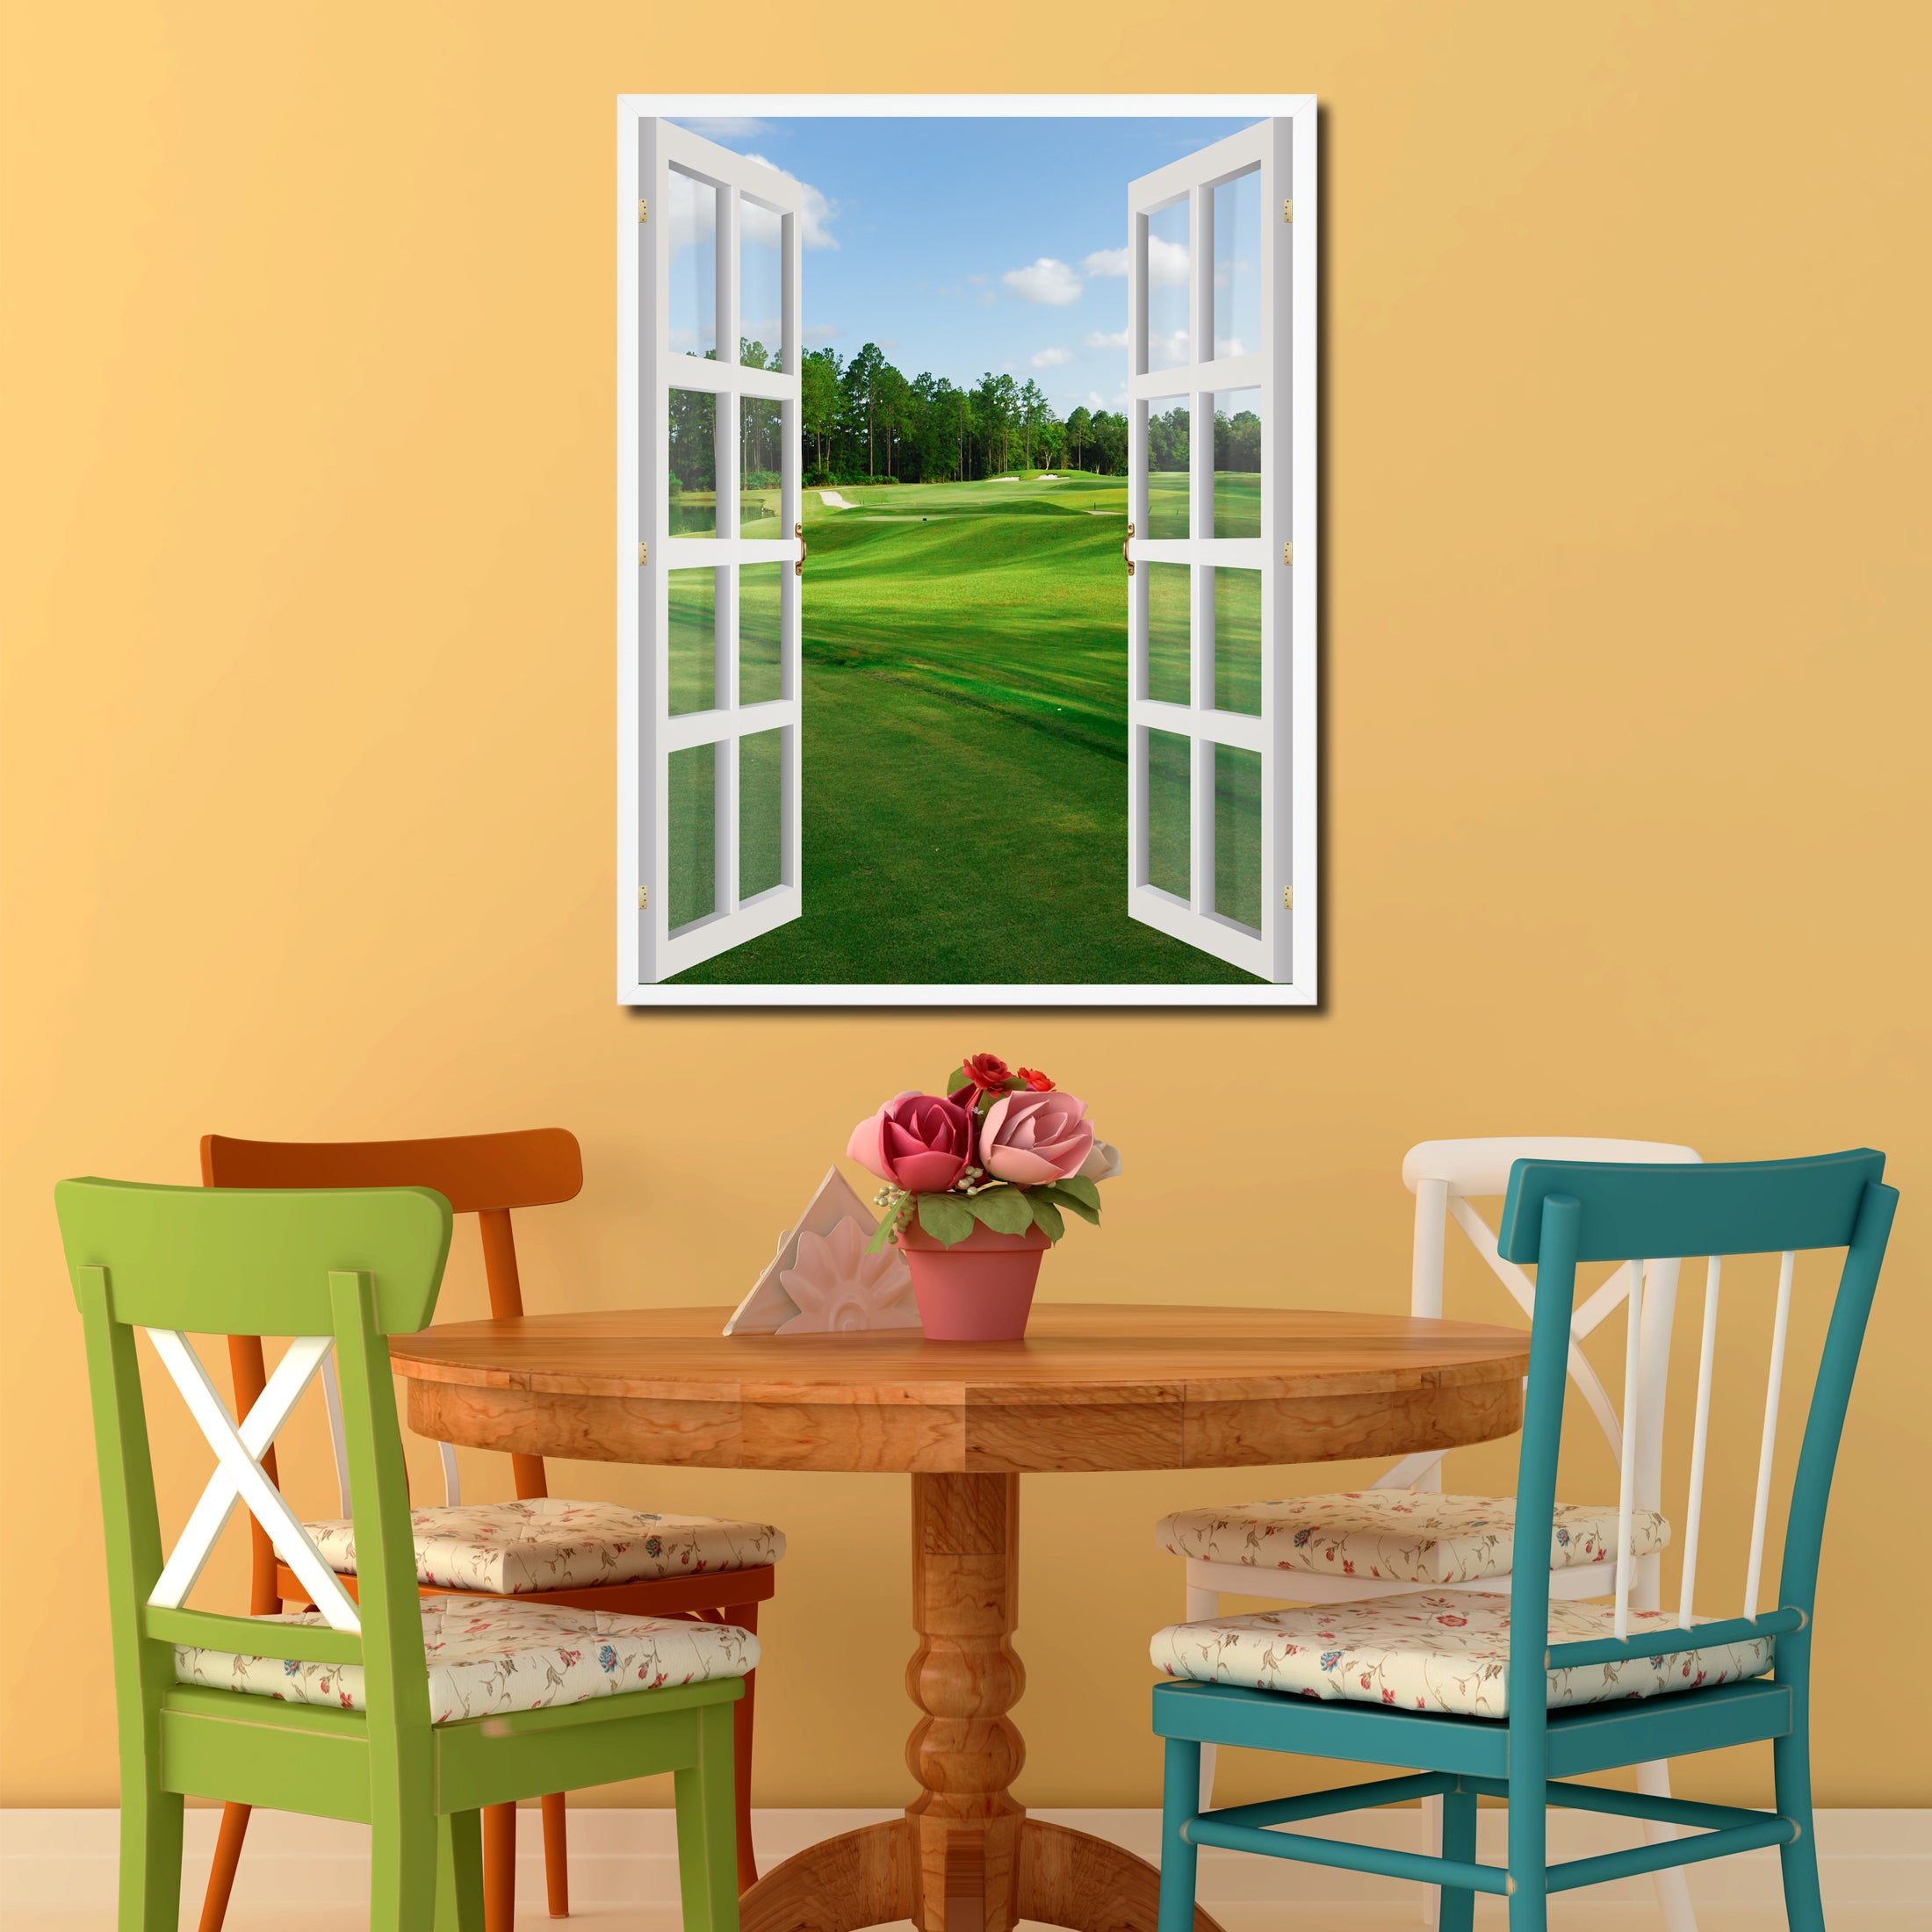 Fleming Island Golf Course Picture French Window Canvas Print with Frame Gifts Home Decor Wall Art Collection